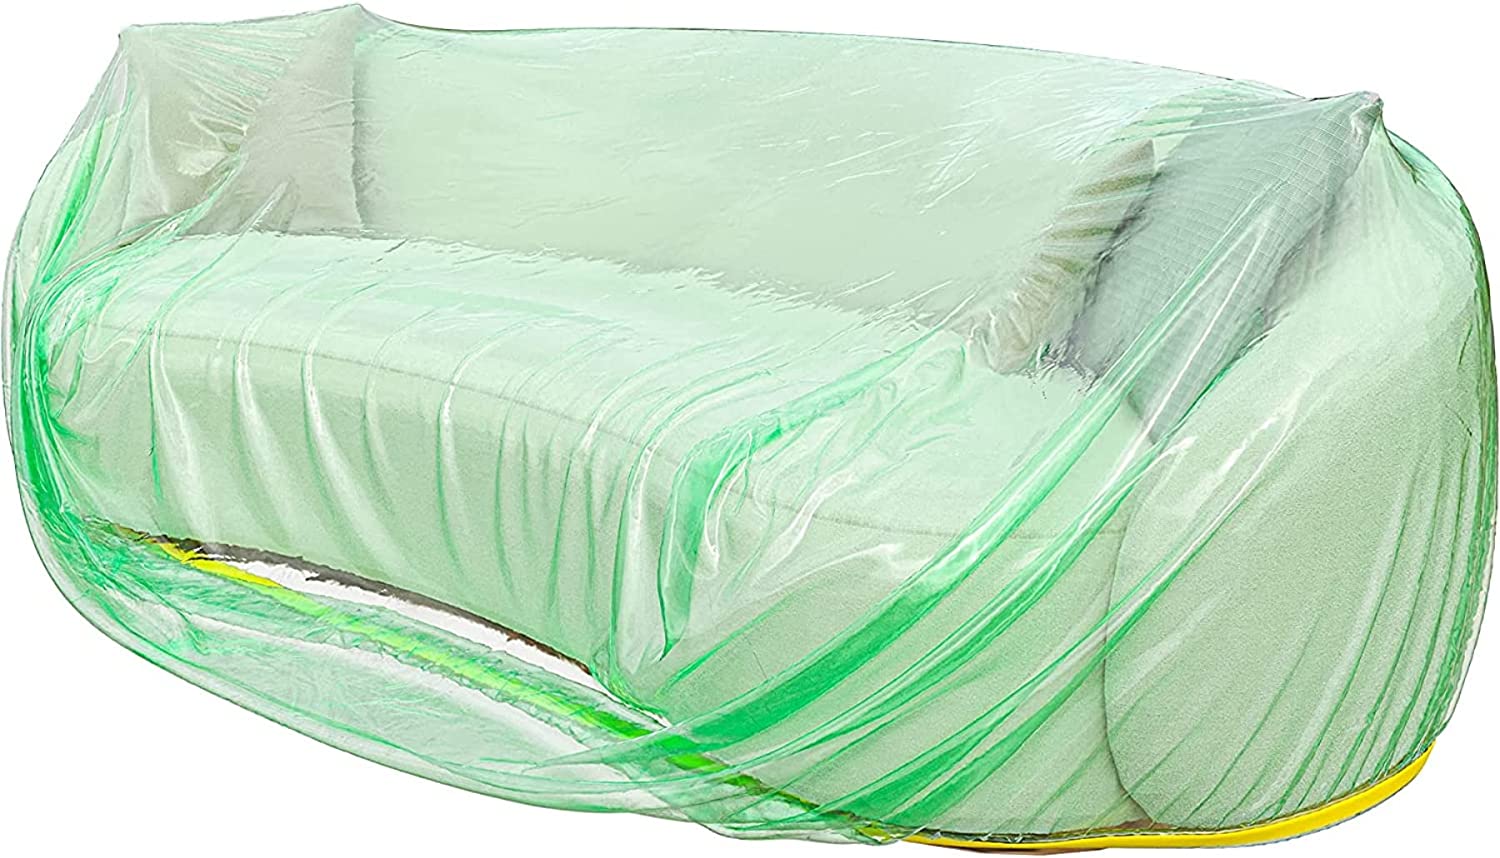 Sofa Bean Bag Useful Dust-Proof Extra Large Bean Bag Chair Cover Green